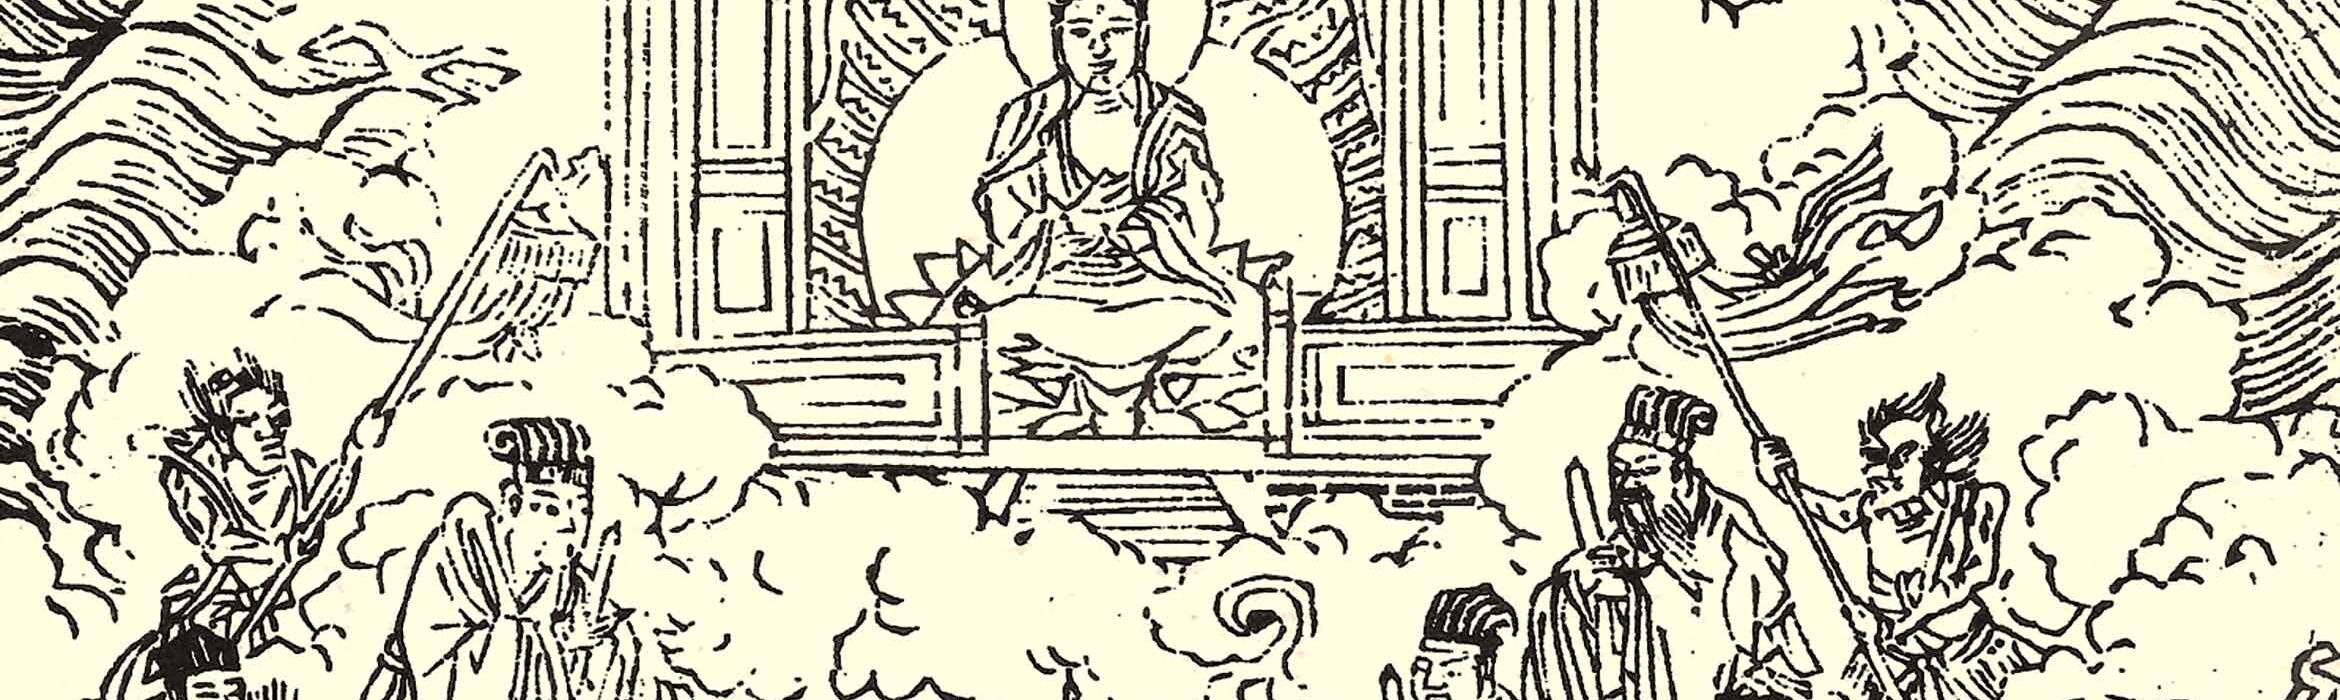 Historiography and Hagiography in Buddhism and Beyond